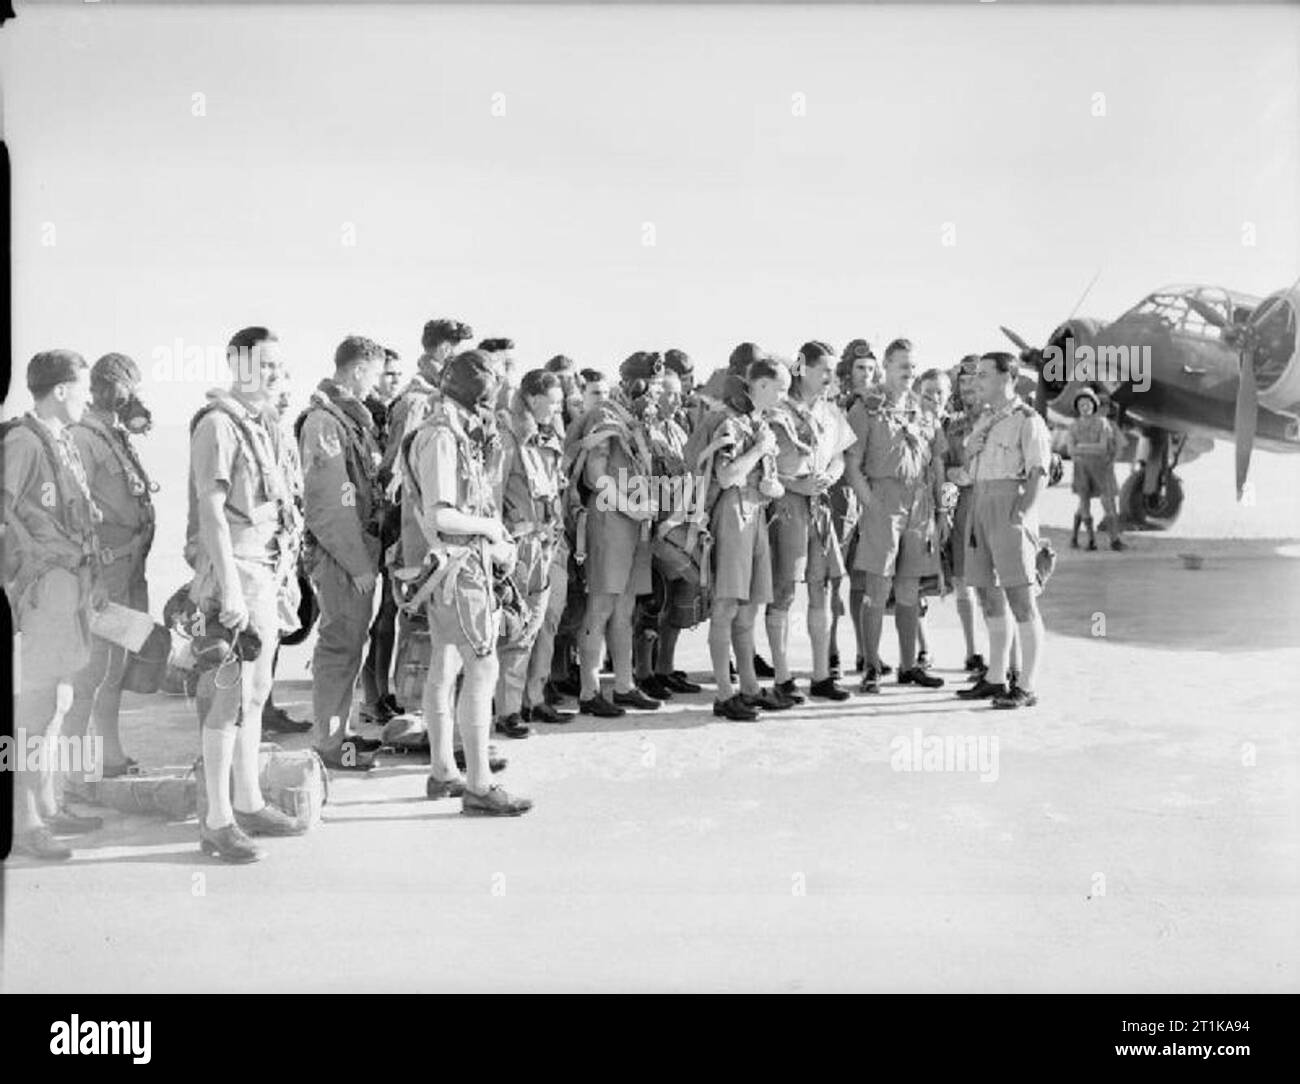 Royal Air Force Operations in the Middle East and North Africa, 1939-1943. The Commanding Officer of No. 84 Squadron RAF briefs his aircrew before a training sortie at Shaibah, Iraq. Stock Photo